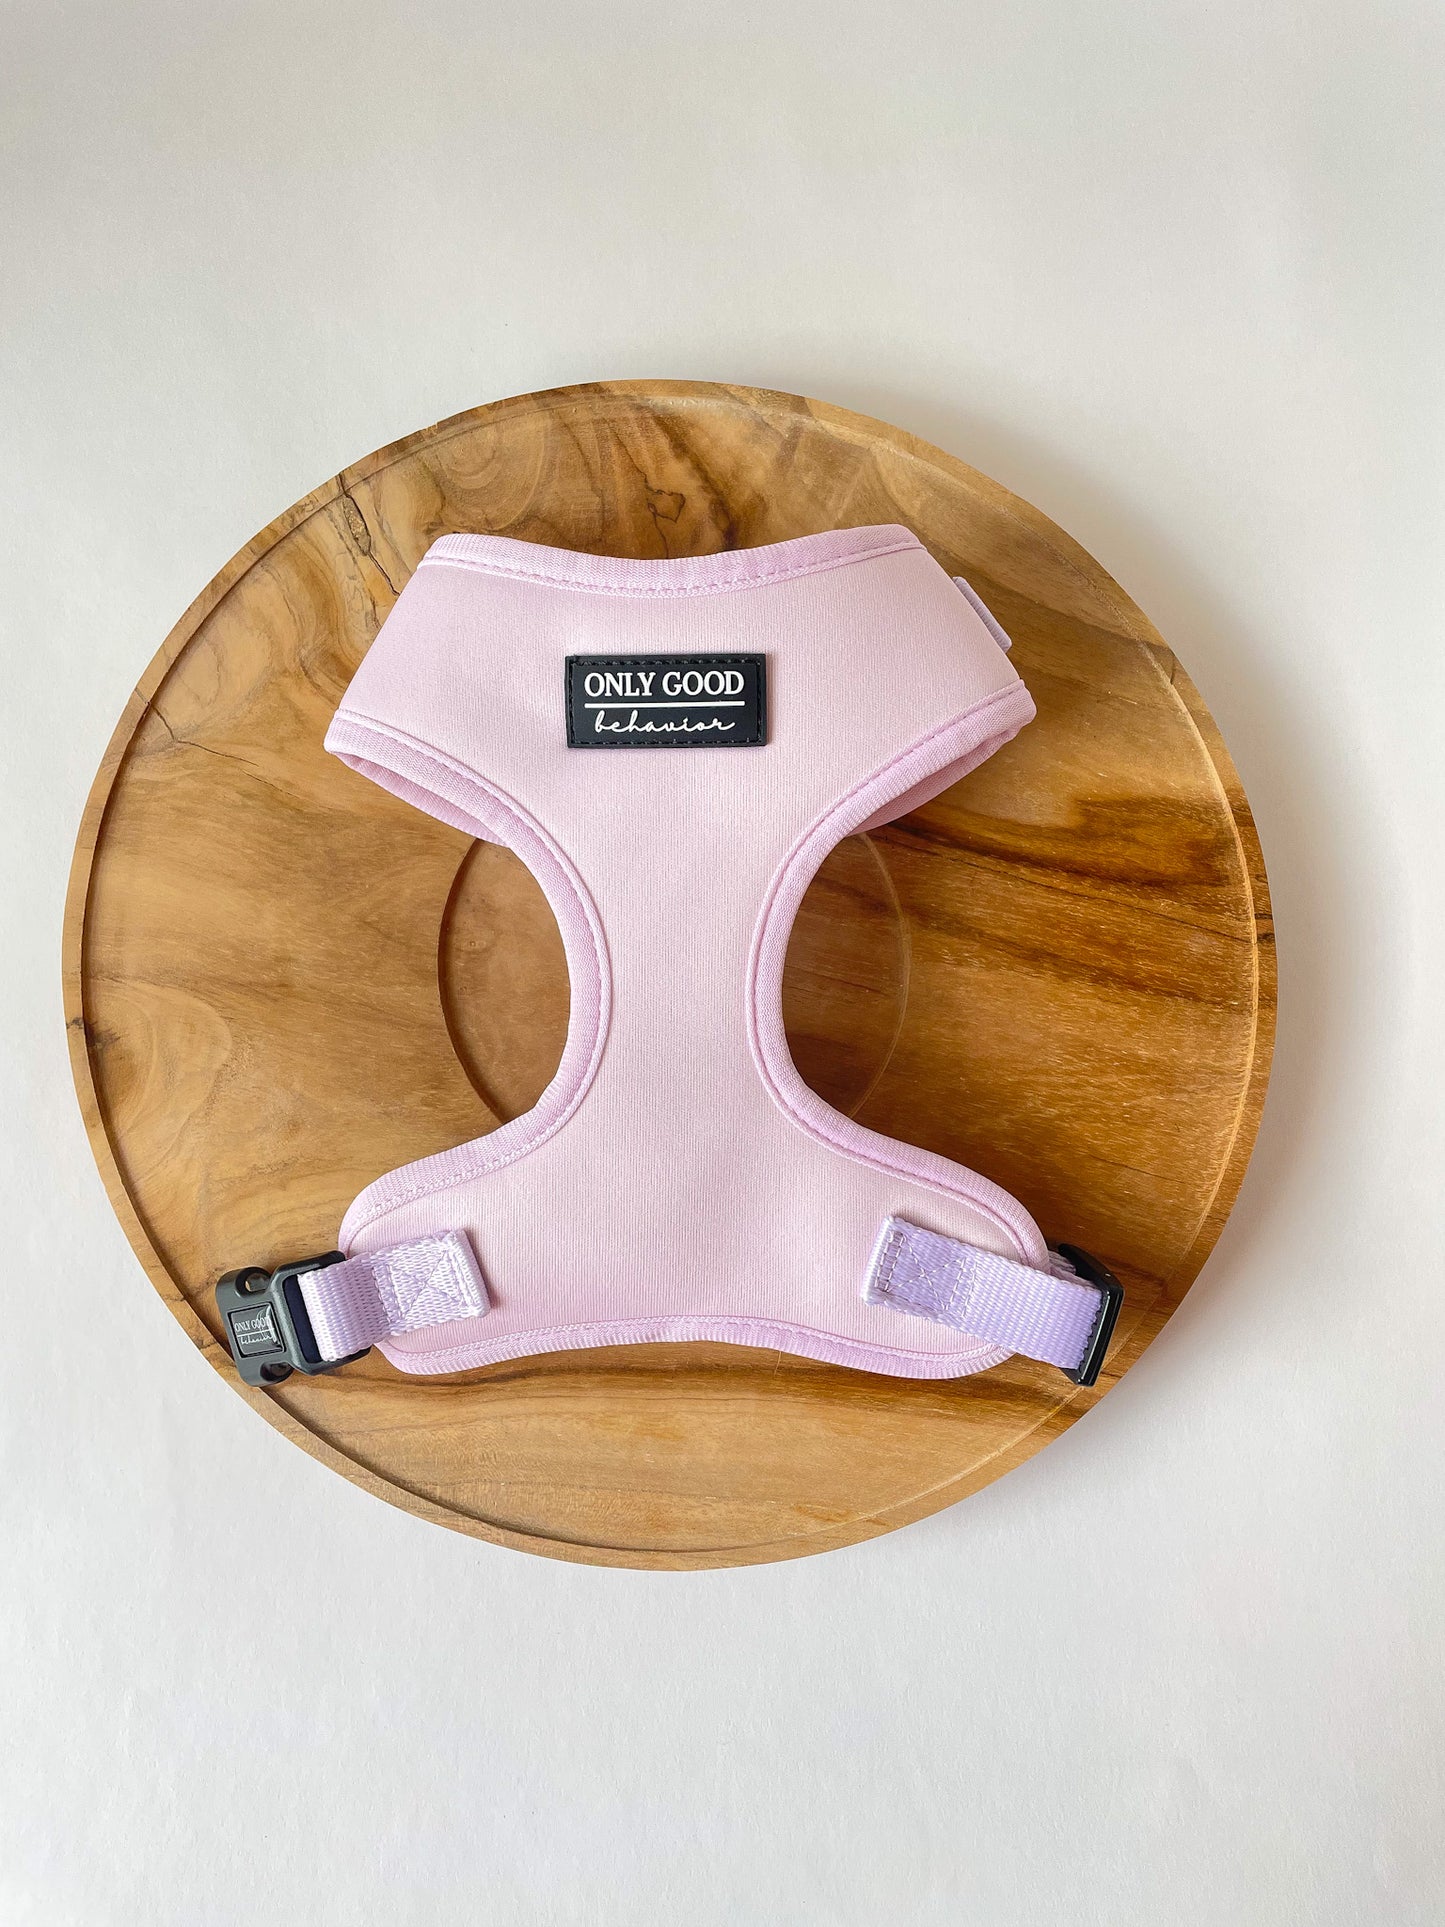 Adjustable Harness - Pretty in Pink